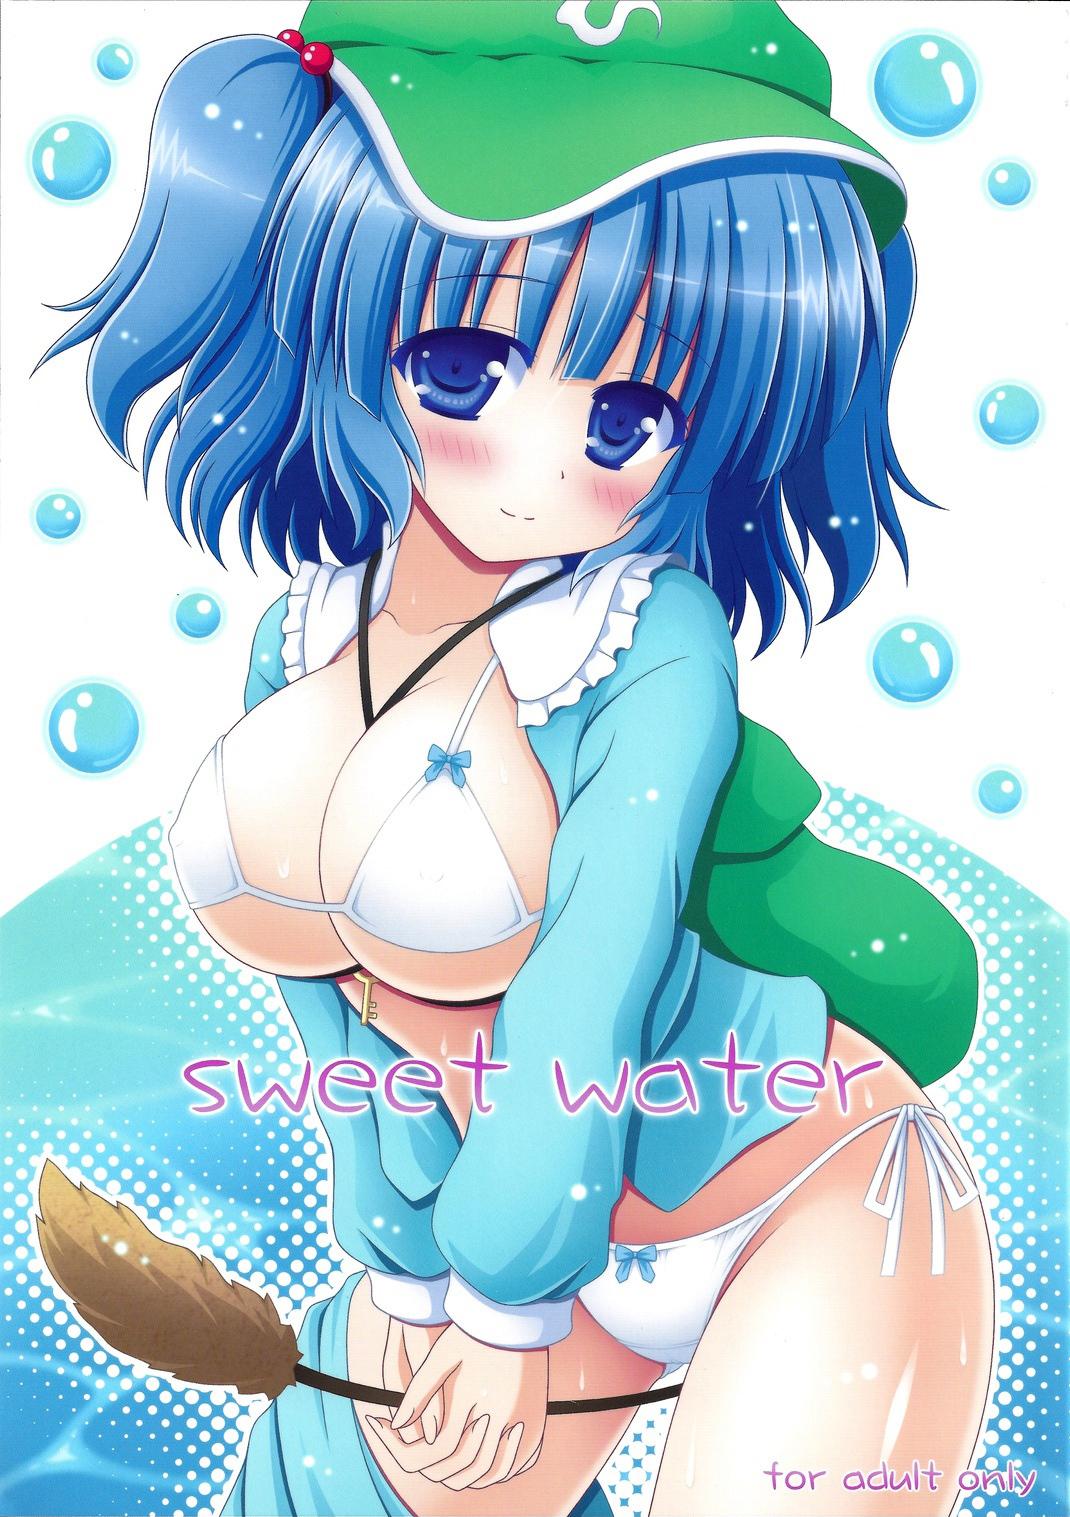 Bigtits sweet water - Touhou project Oralsex - Picture 1